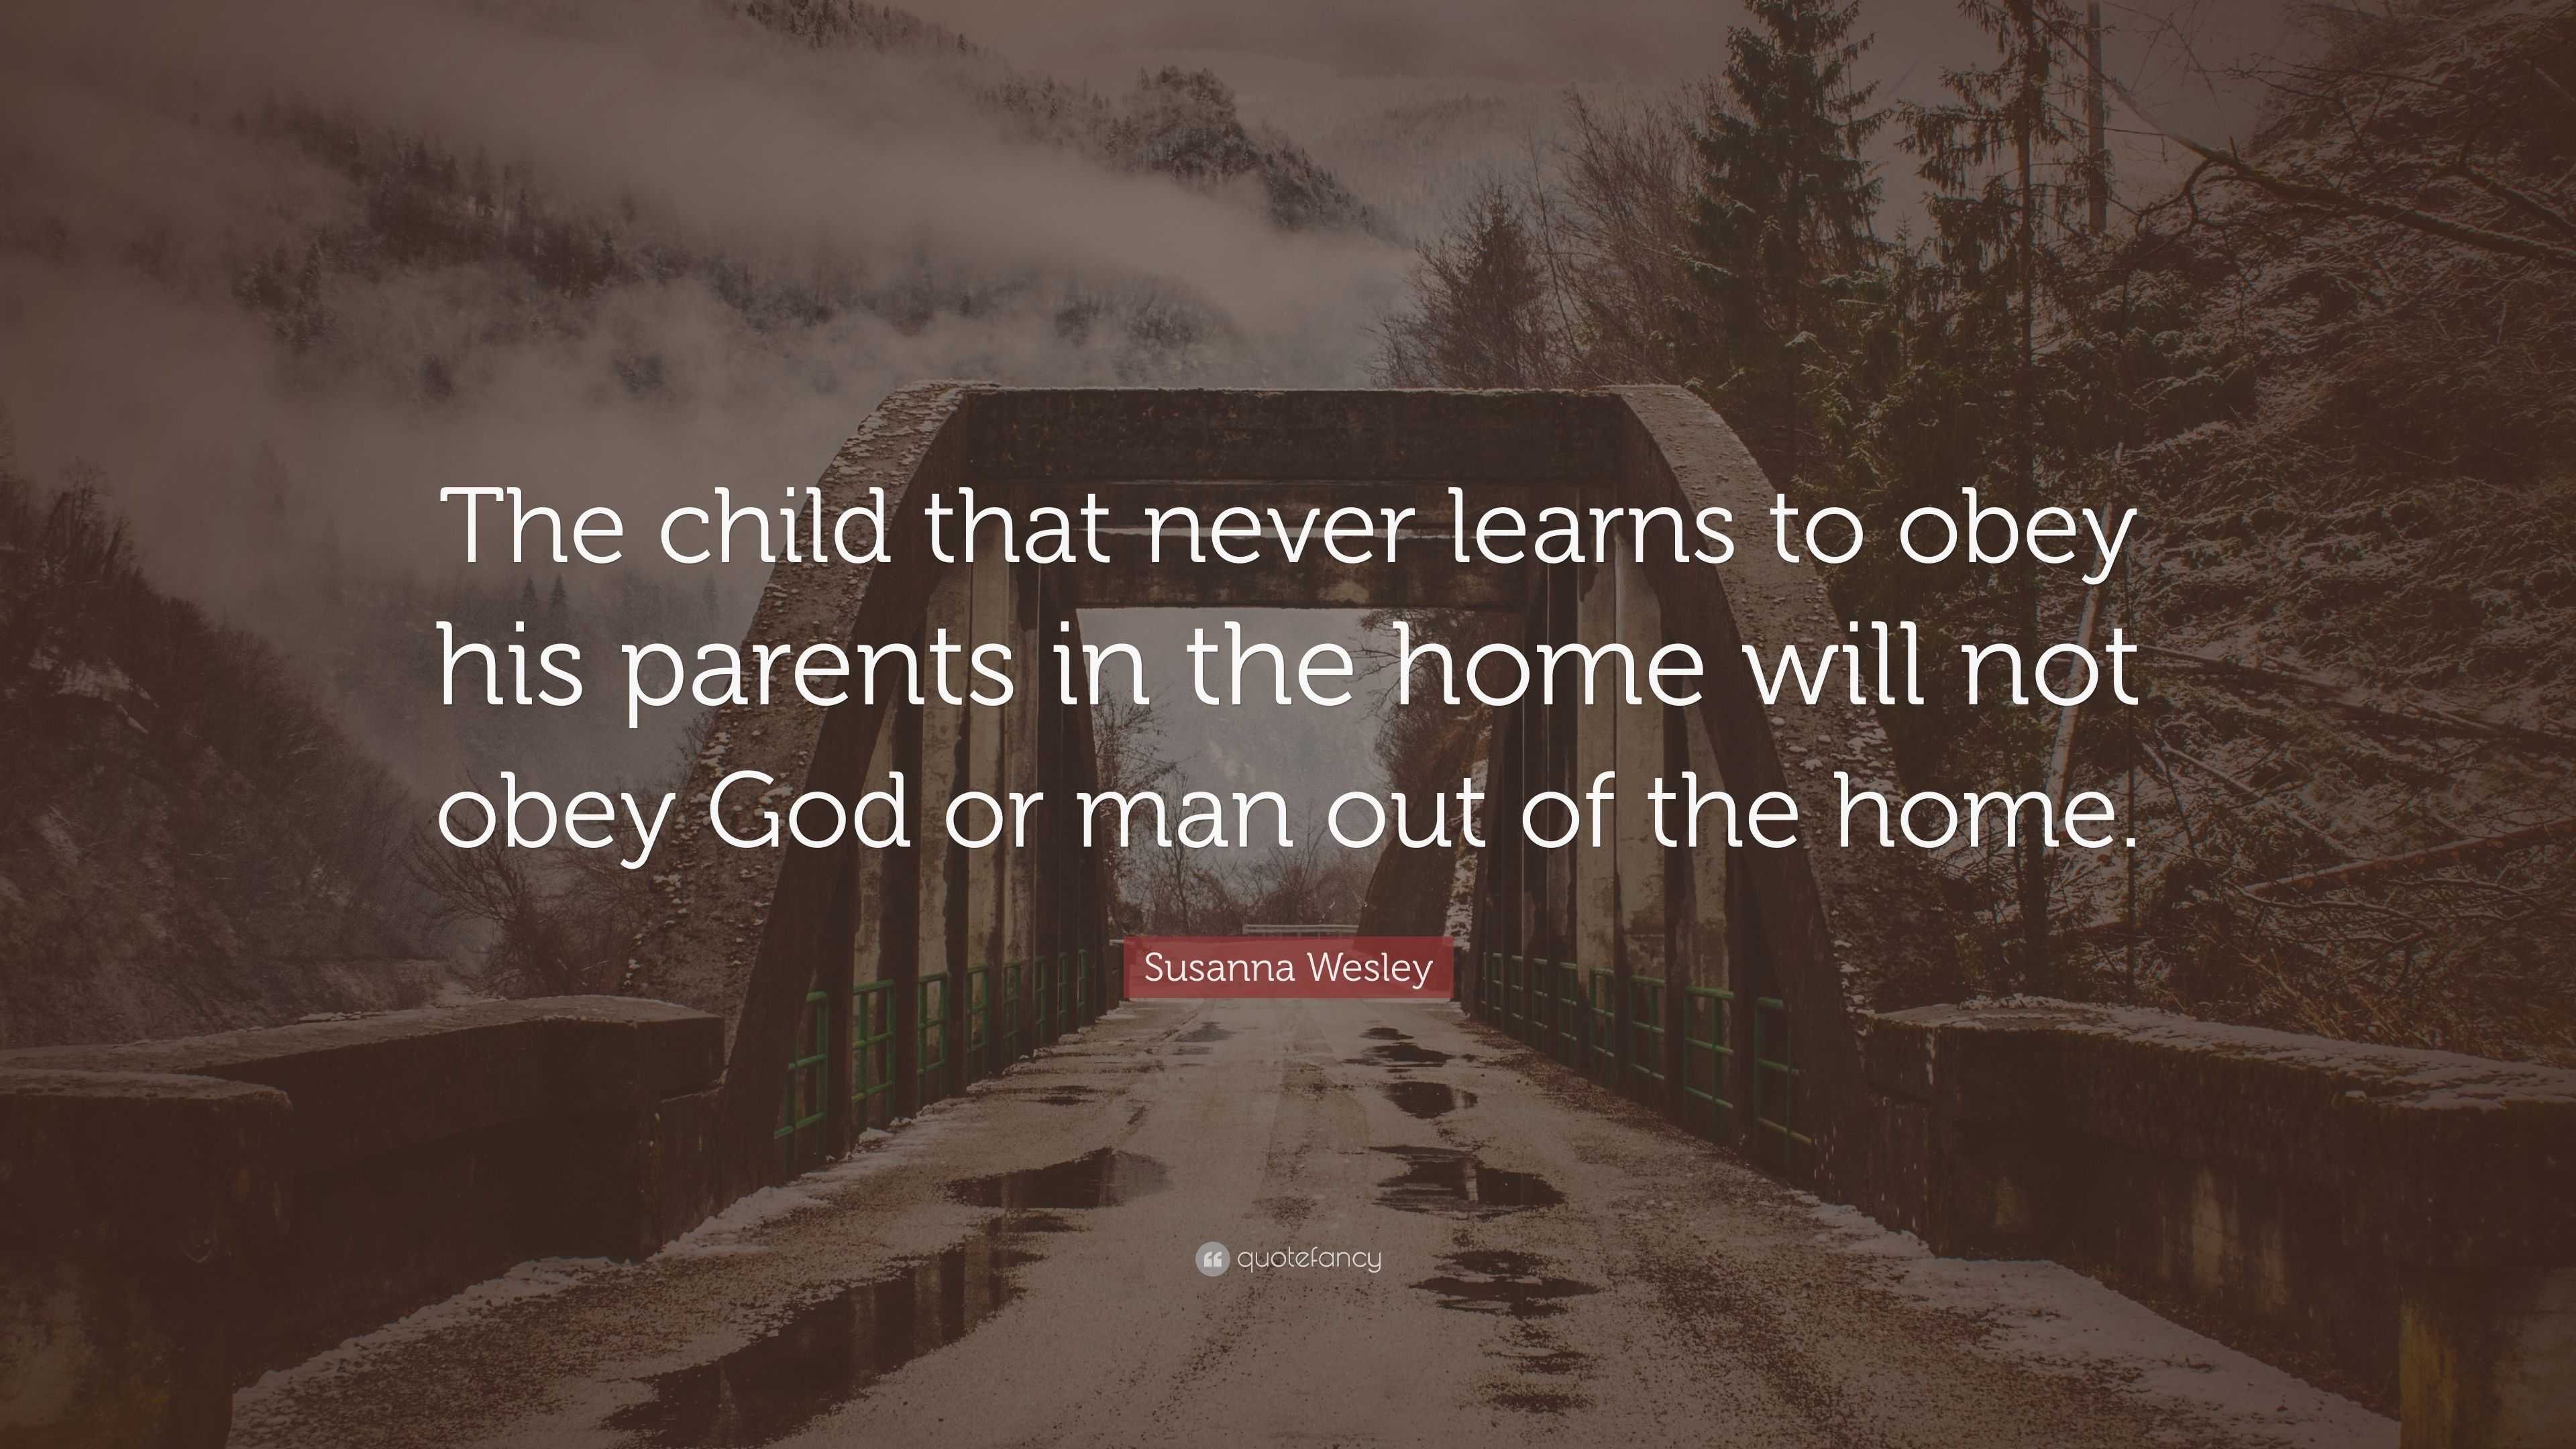 Susanna Wesley Quote: “The child that never learns to obey his parents